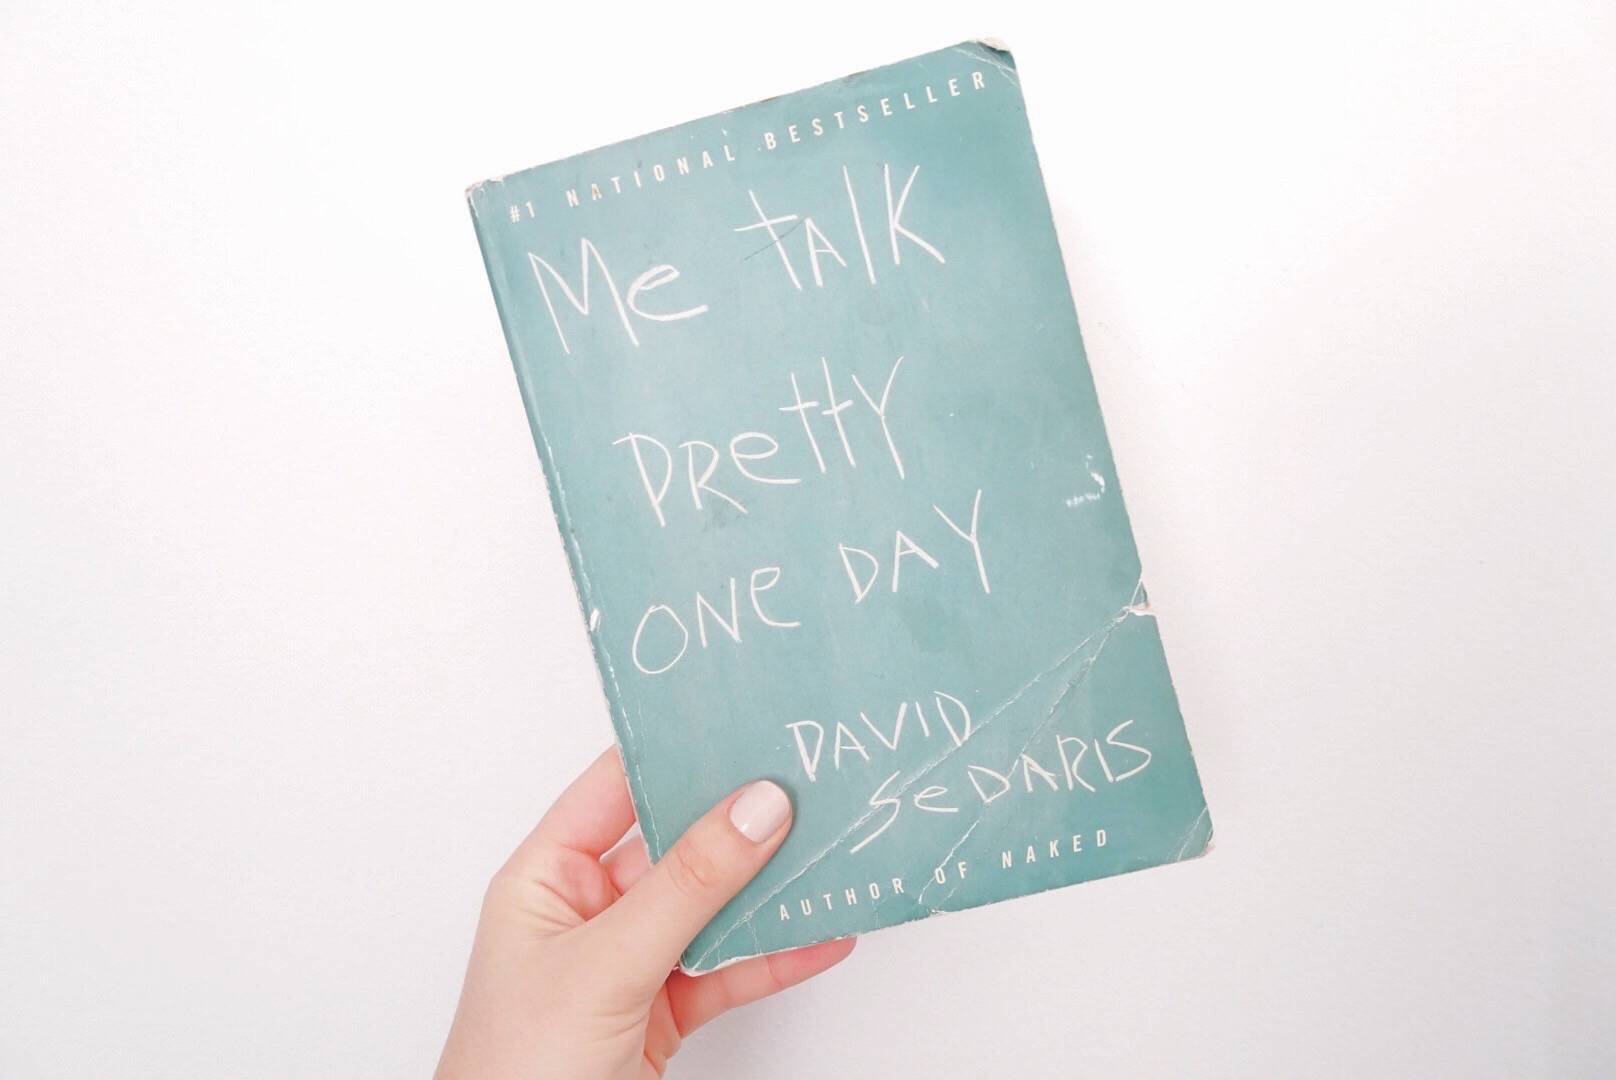 David Sedaris' autobiography formulated by a collection of comedic essays.